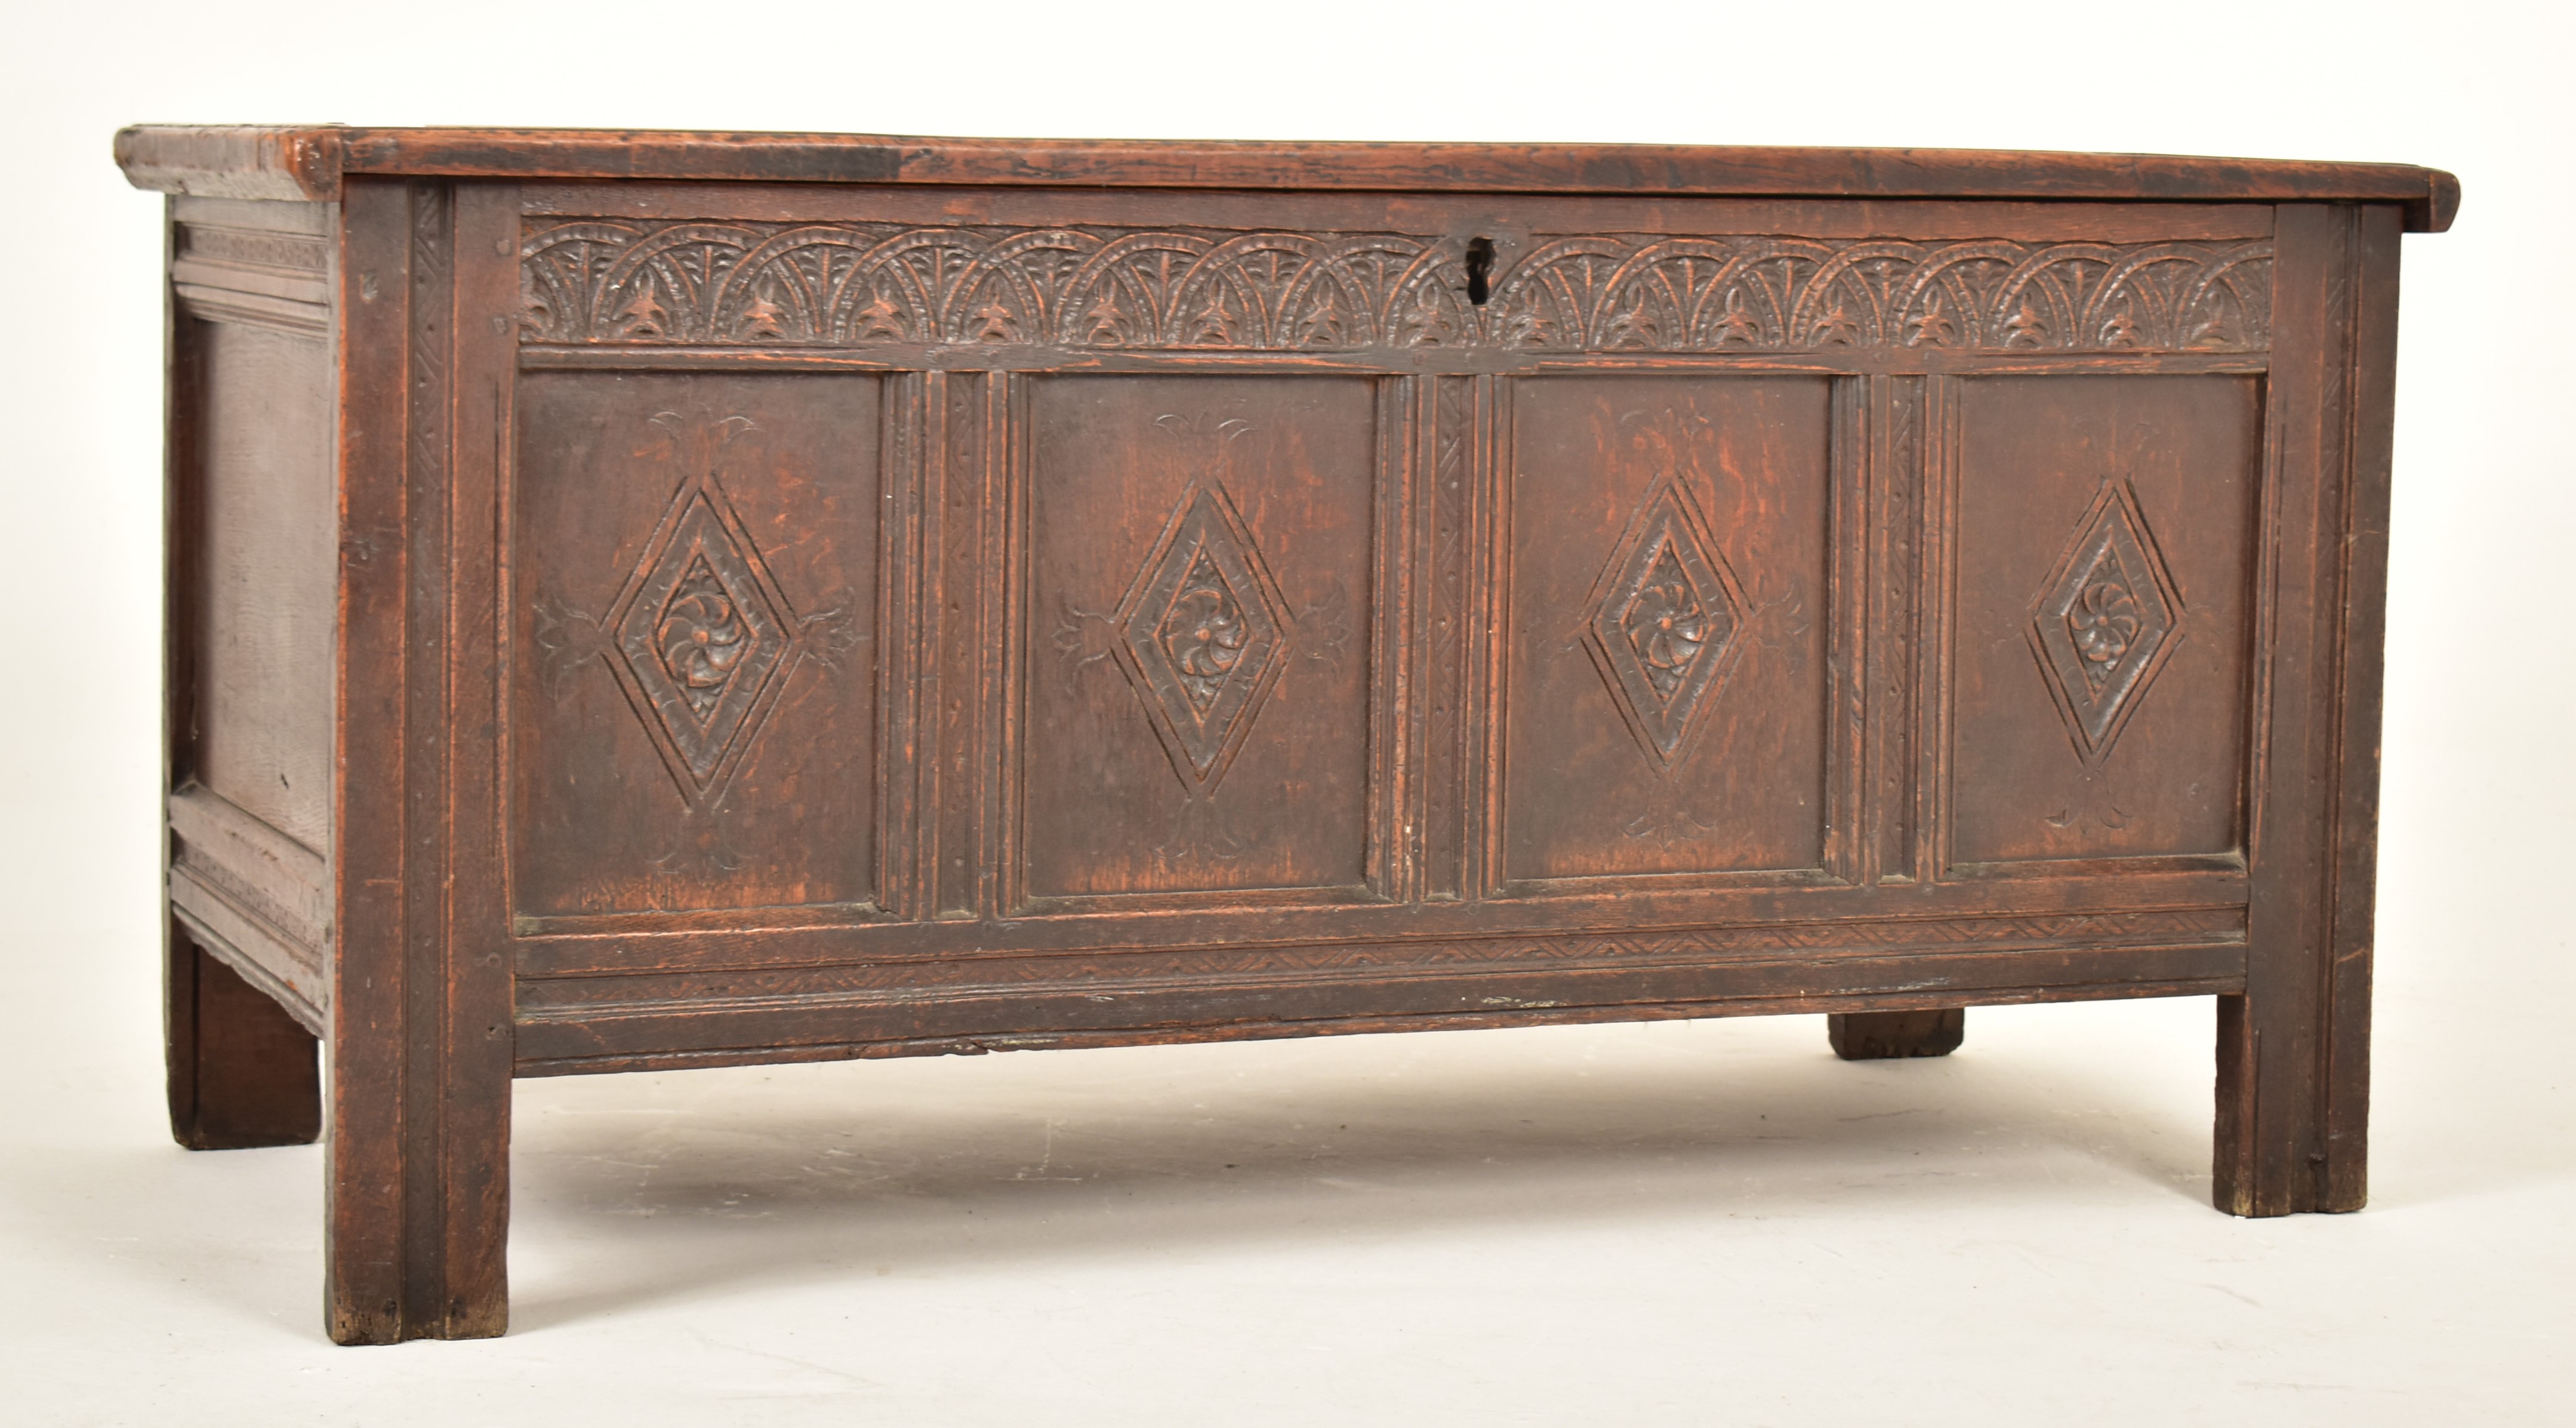 LATE 17TH CENTURY CARVED OAK HINGED TOP TRUNK CHEST